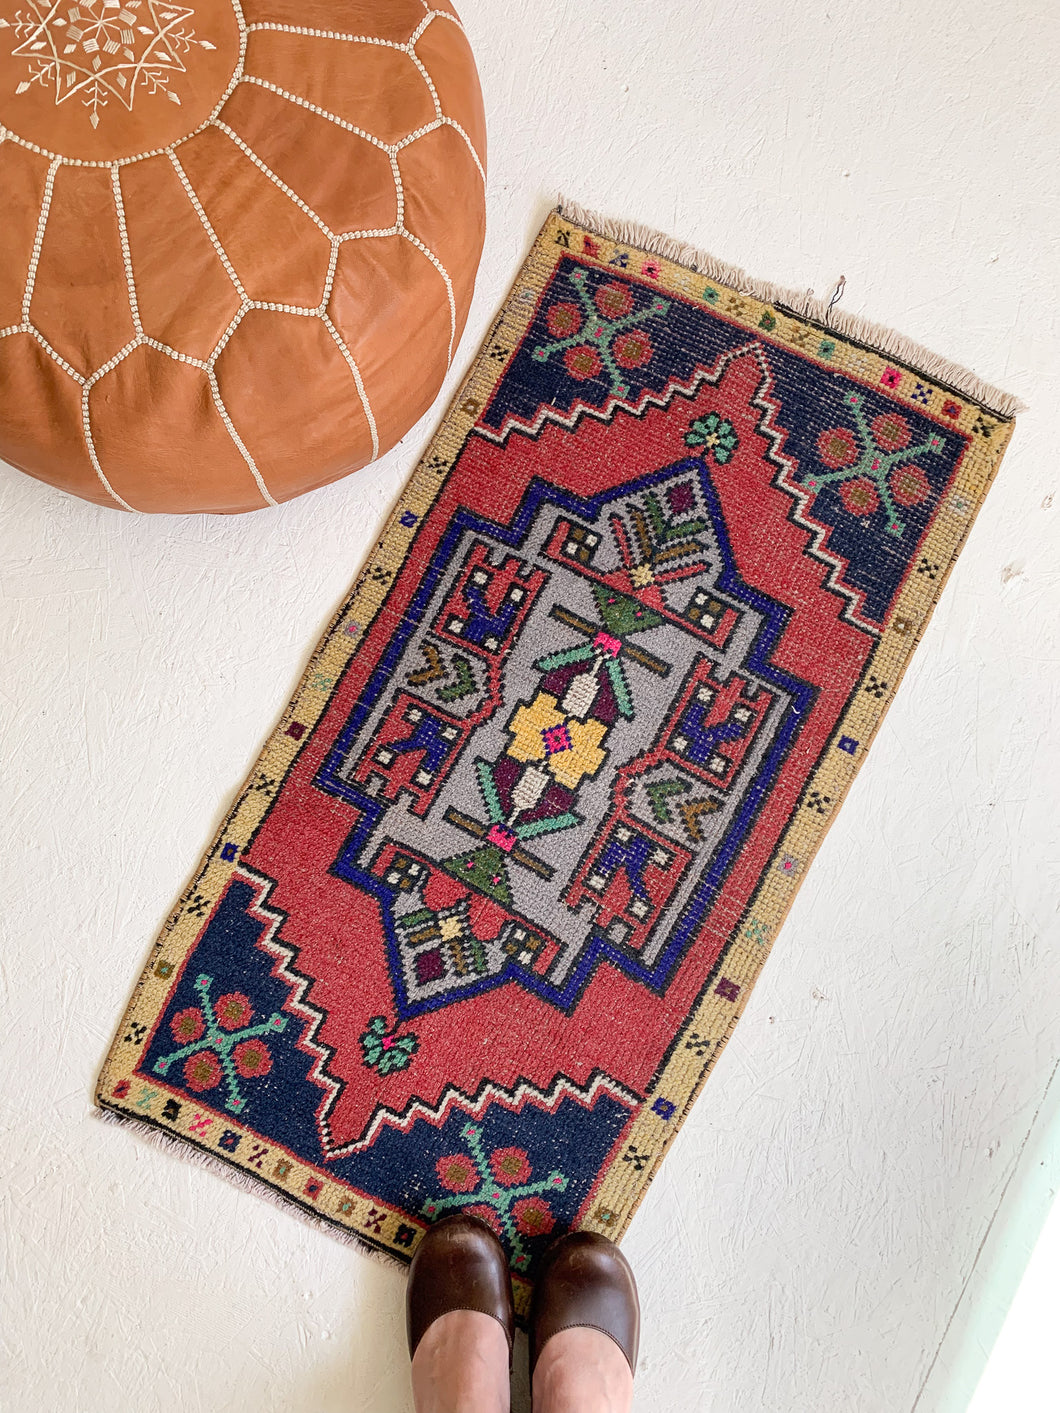 Reserved for Abby - No. 551 - 1.7' x 3.3' Vintage Turkish Mini Rug